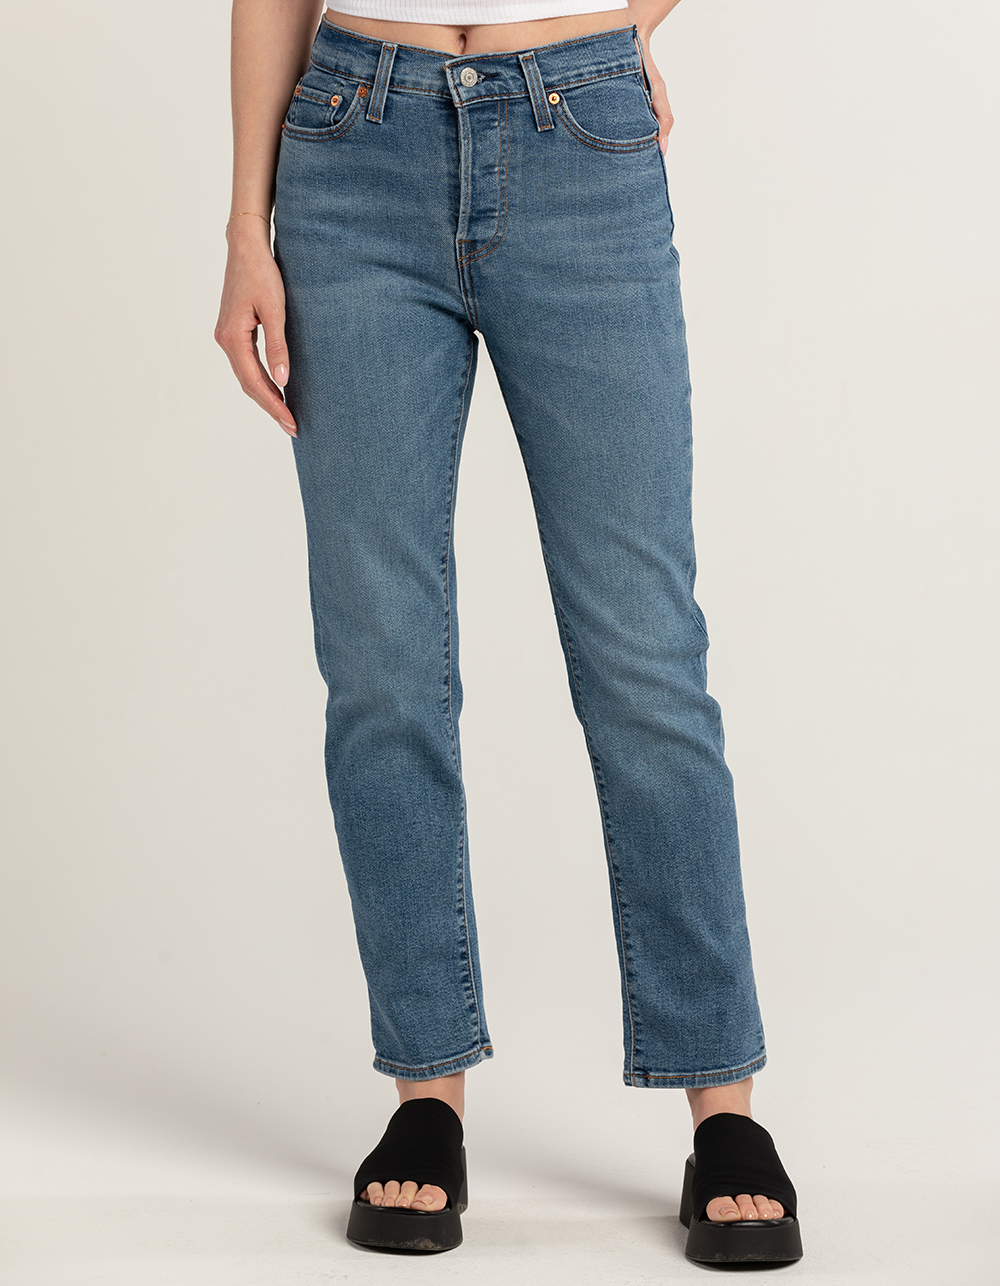 LEVI'S Wedgie Straight Womens Jeans - Summer Love In The Mist - MED ...